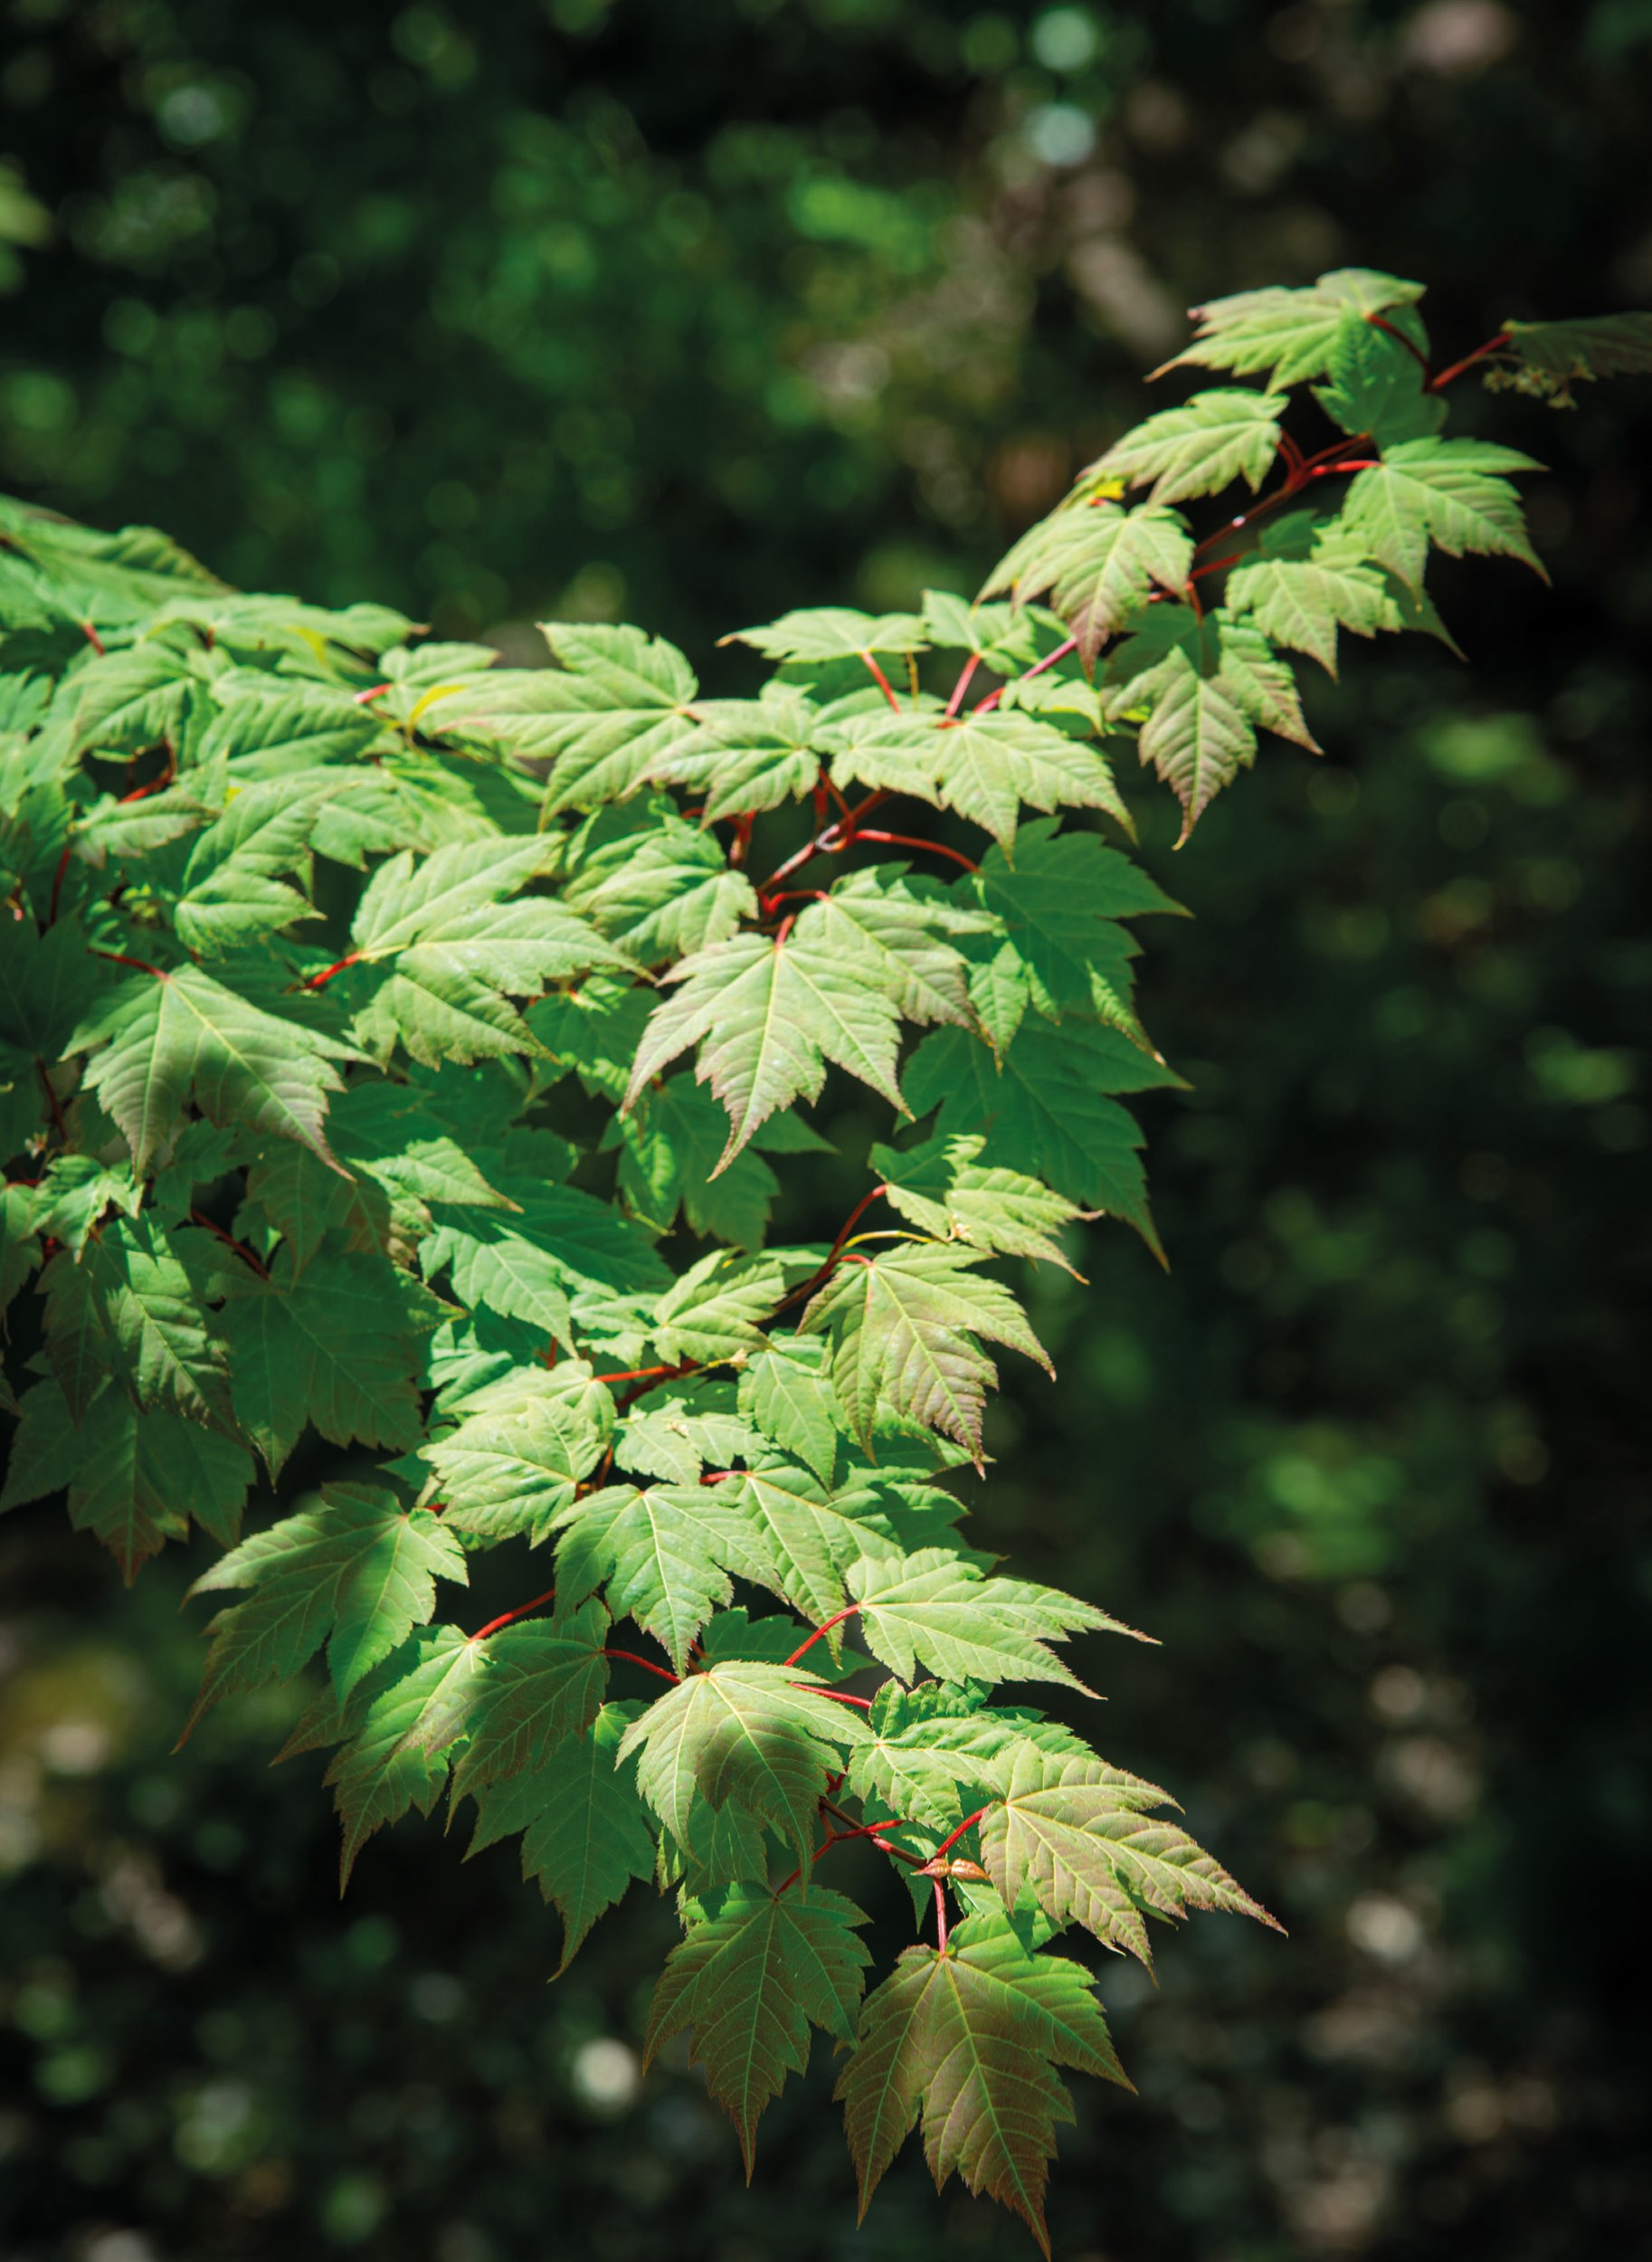 In summer the Tschonoski maple’s leaves are a beautiful green but the leaf stalks usually have a reddish colour, which creates a nice contrast.